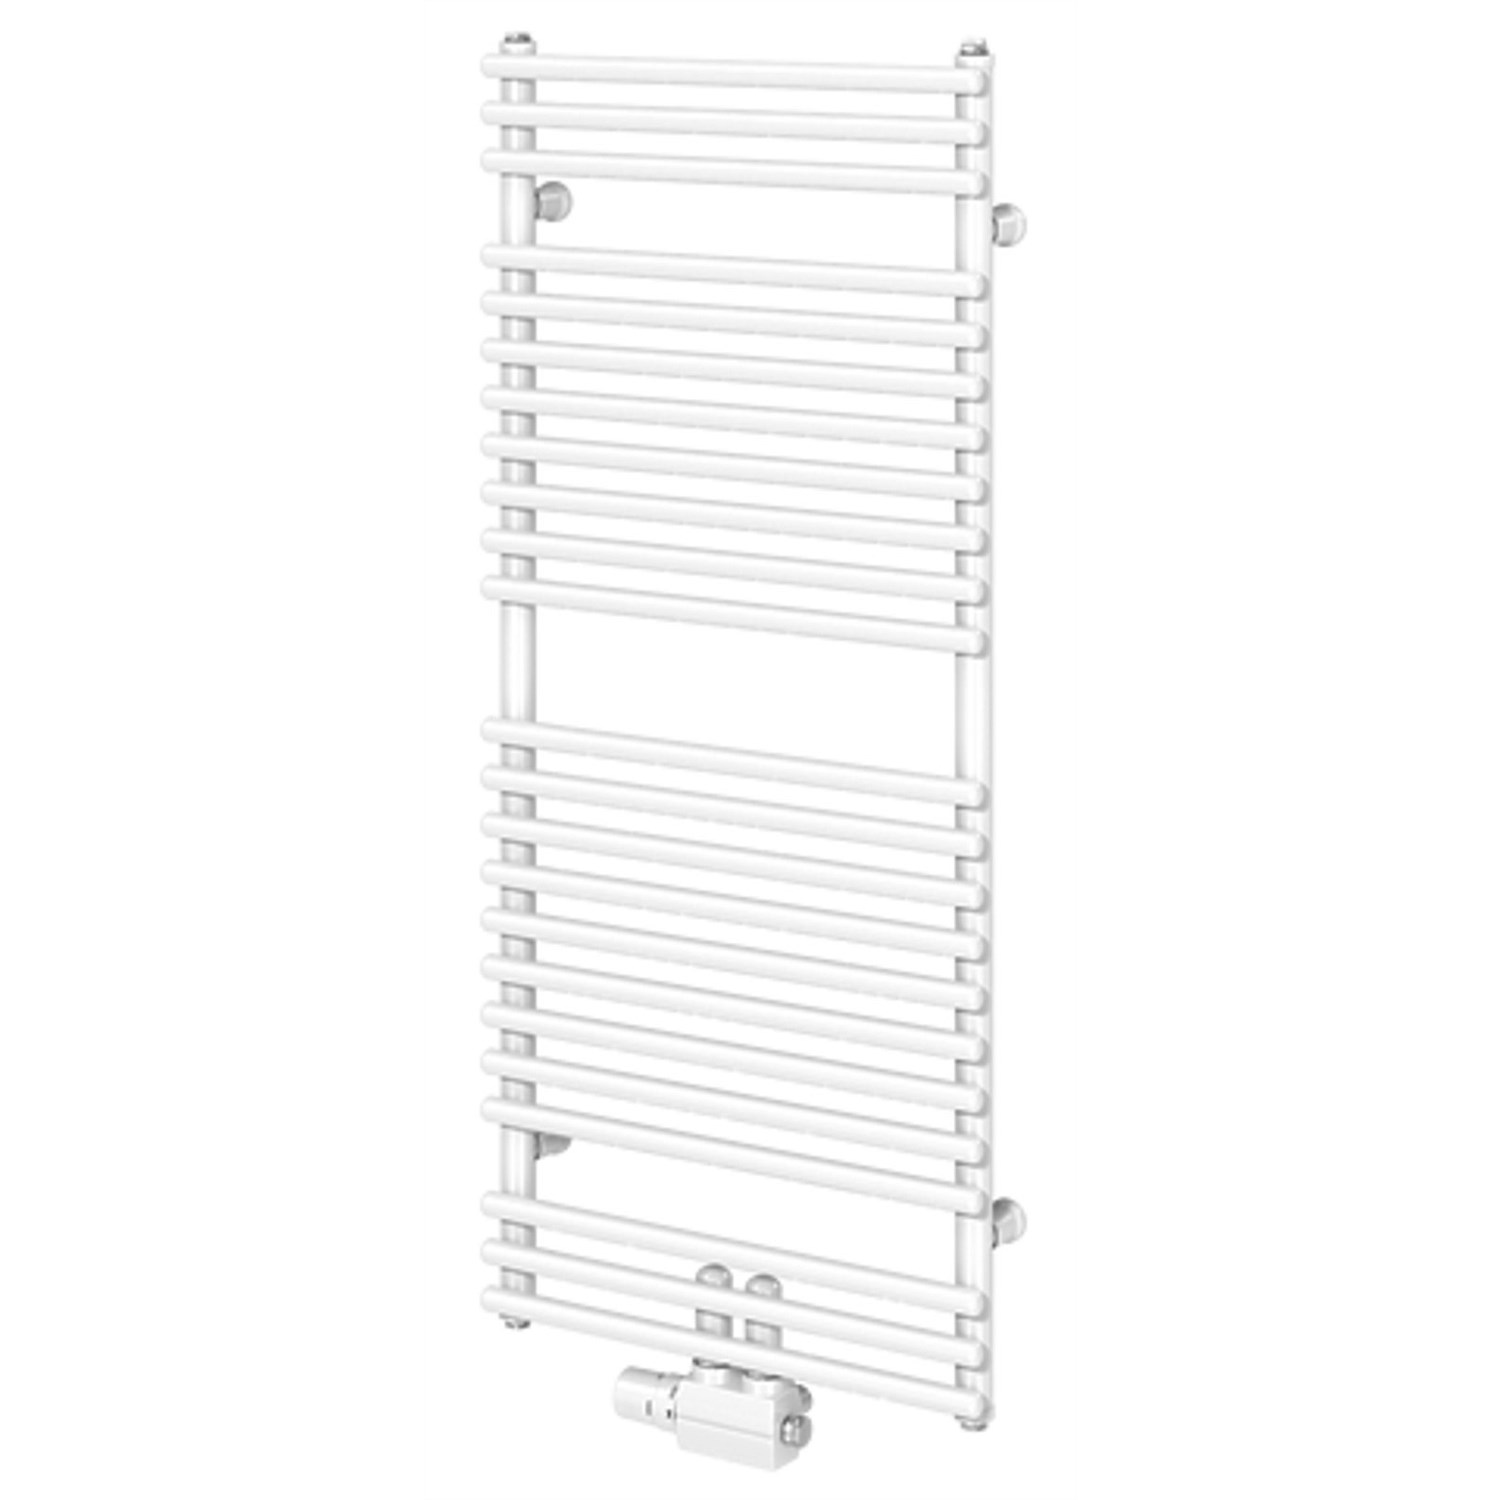 Central Heating - Vogel & Noot DION-VM Centrally Connected Towel Warmer